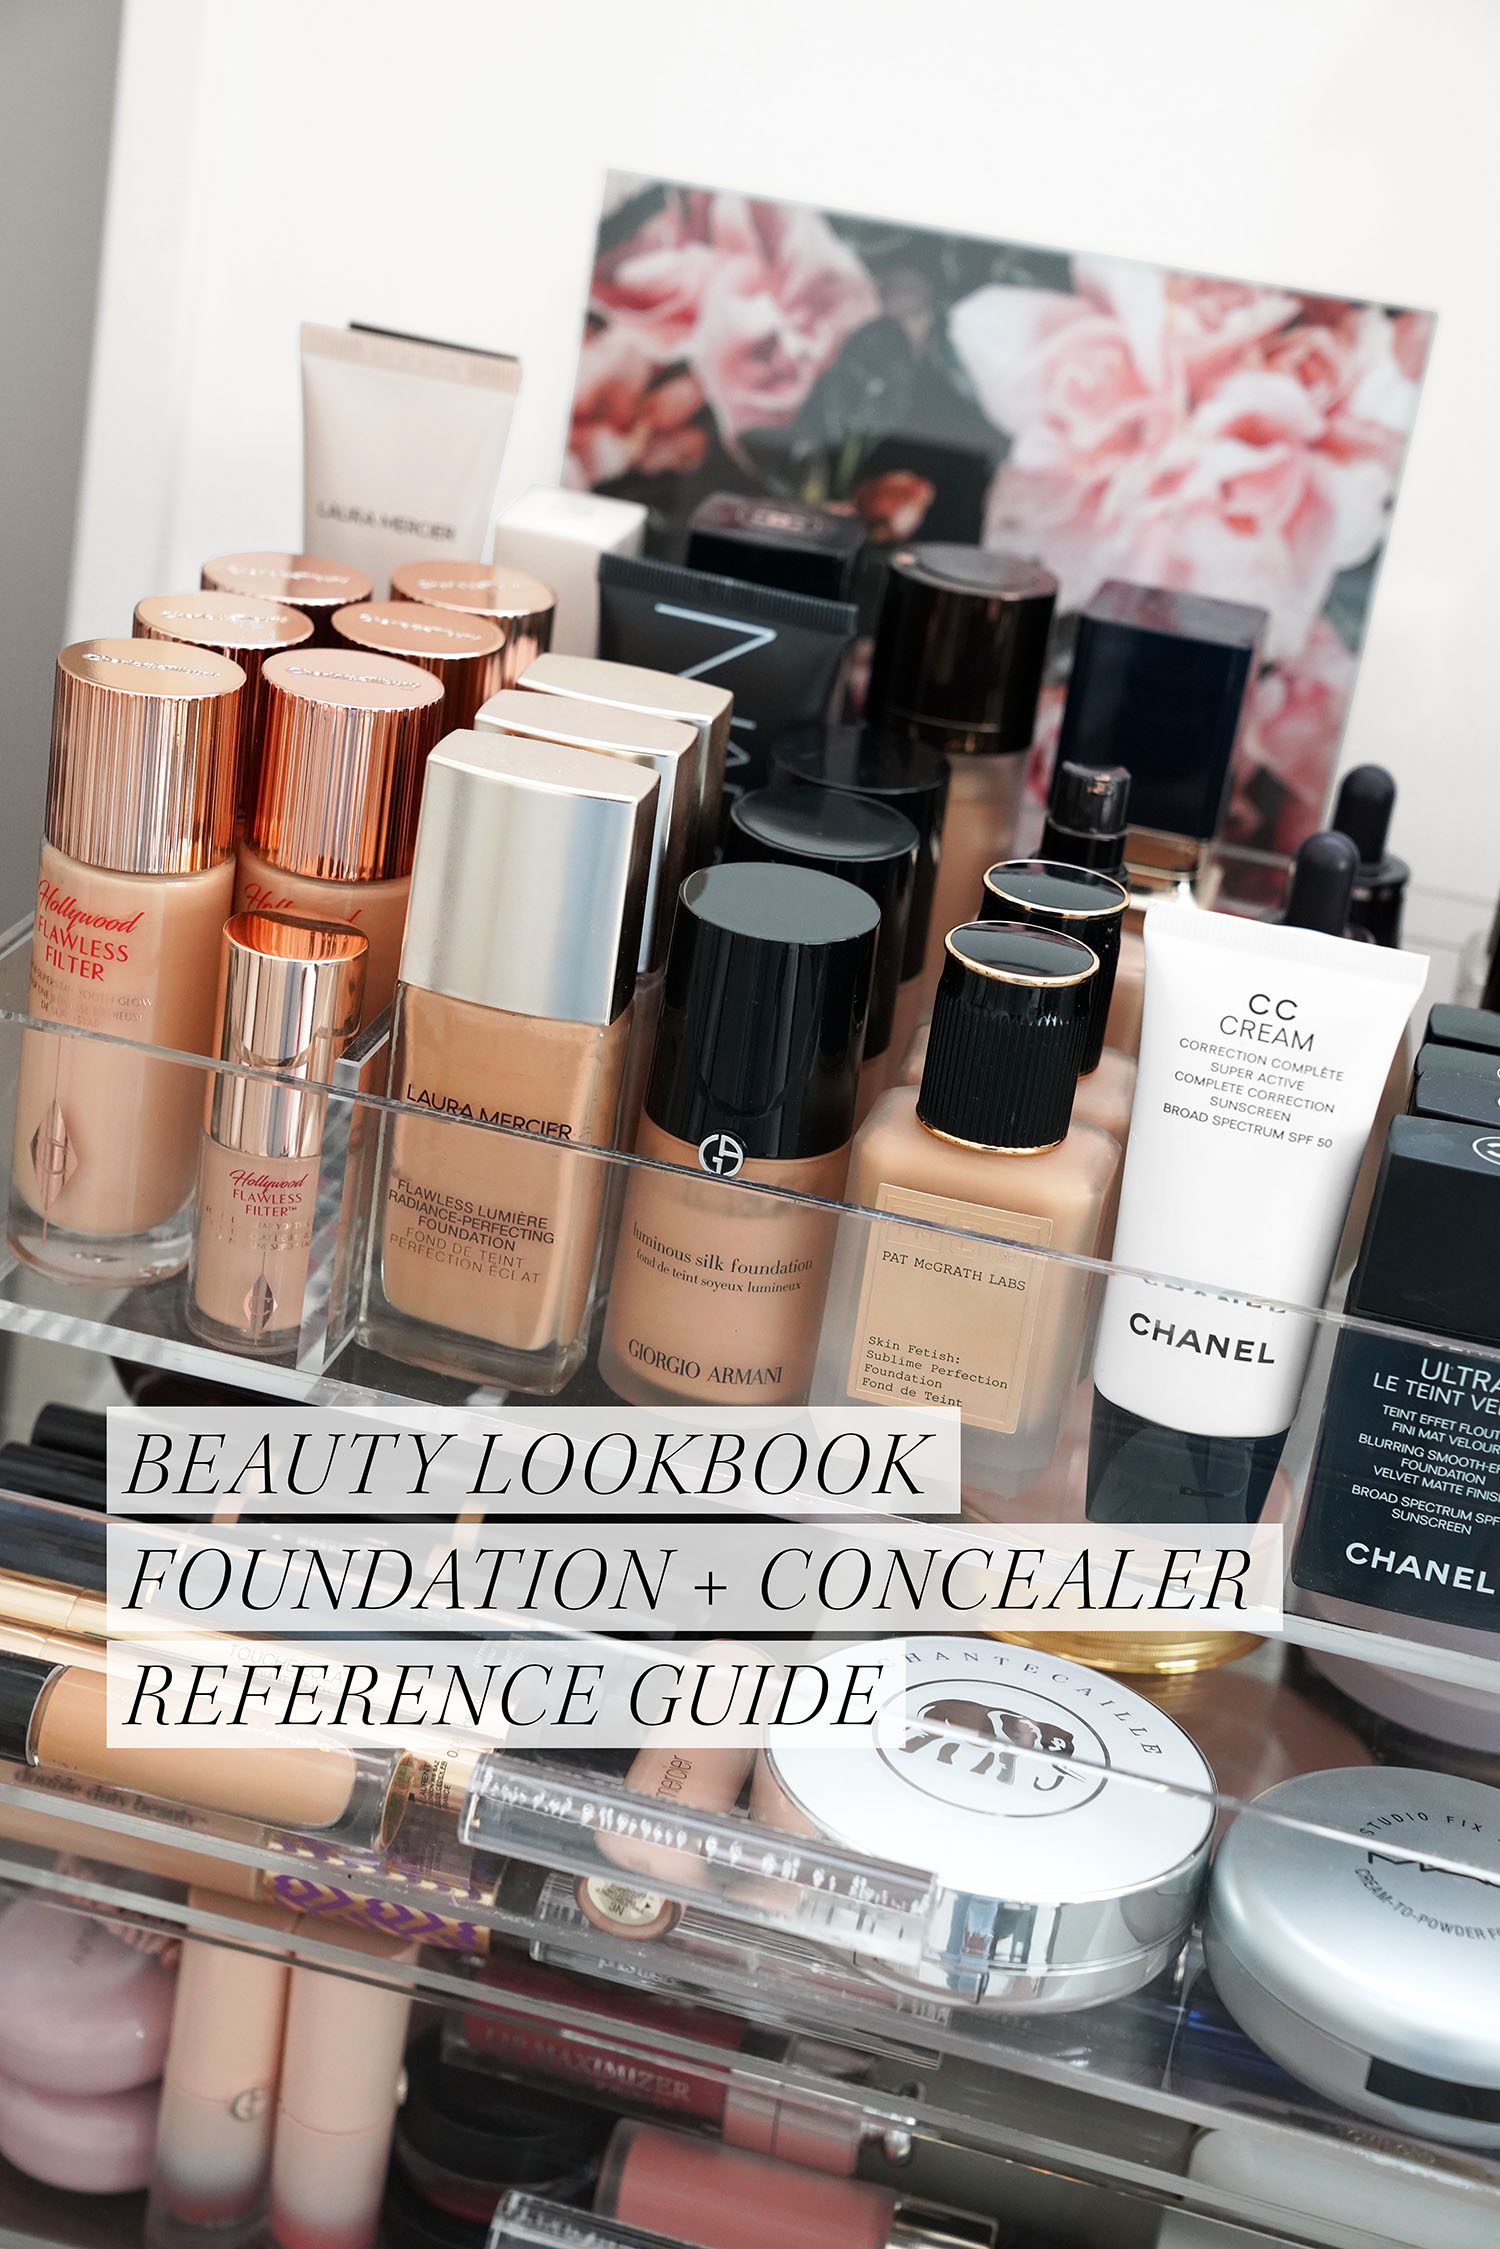 Concealer Archives - The Beauty Look Book